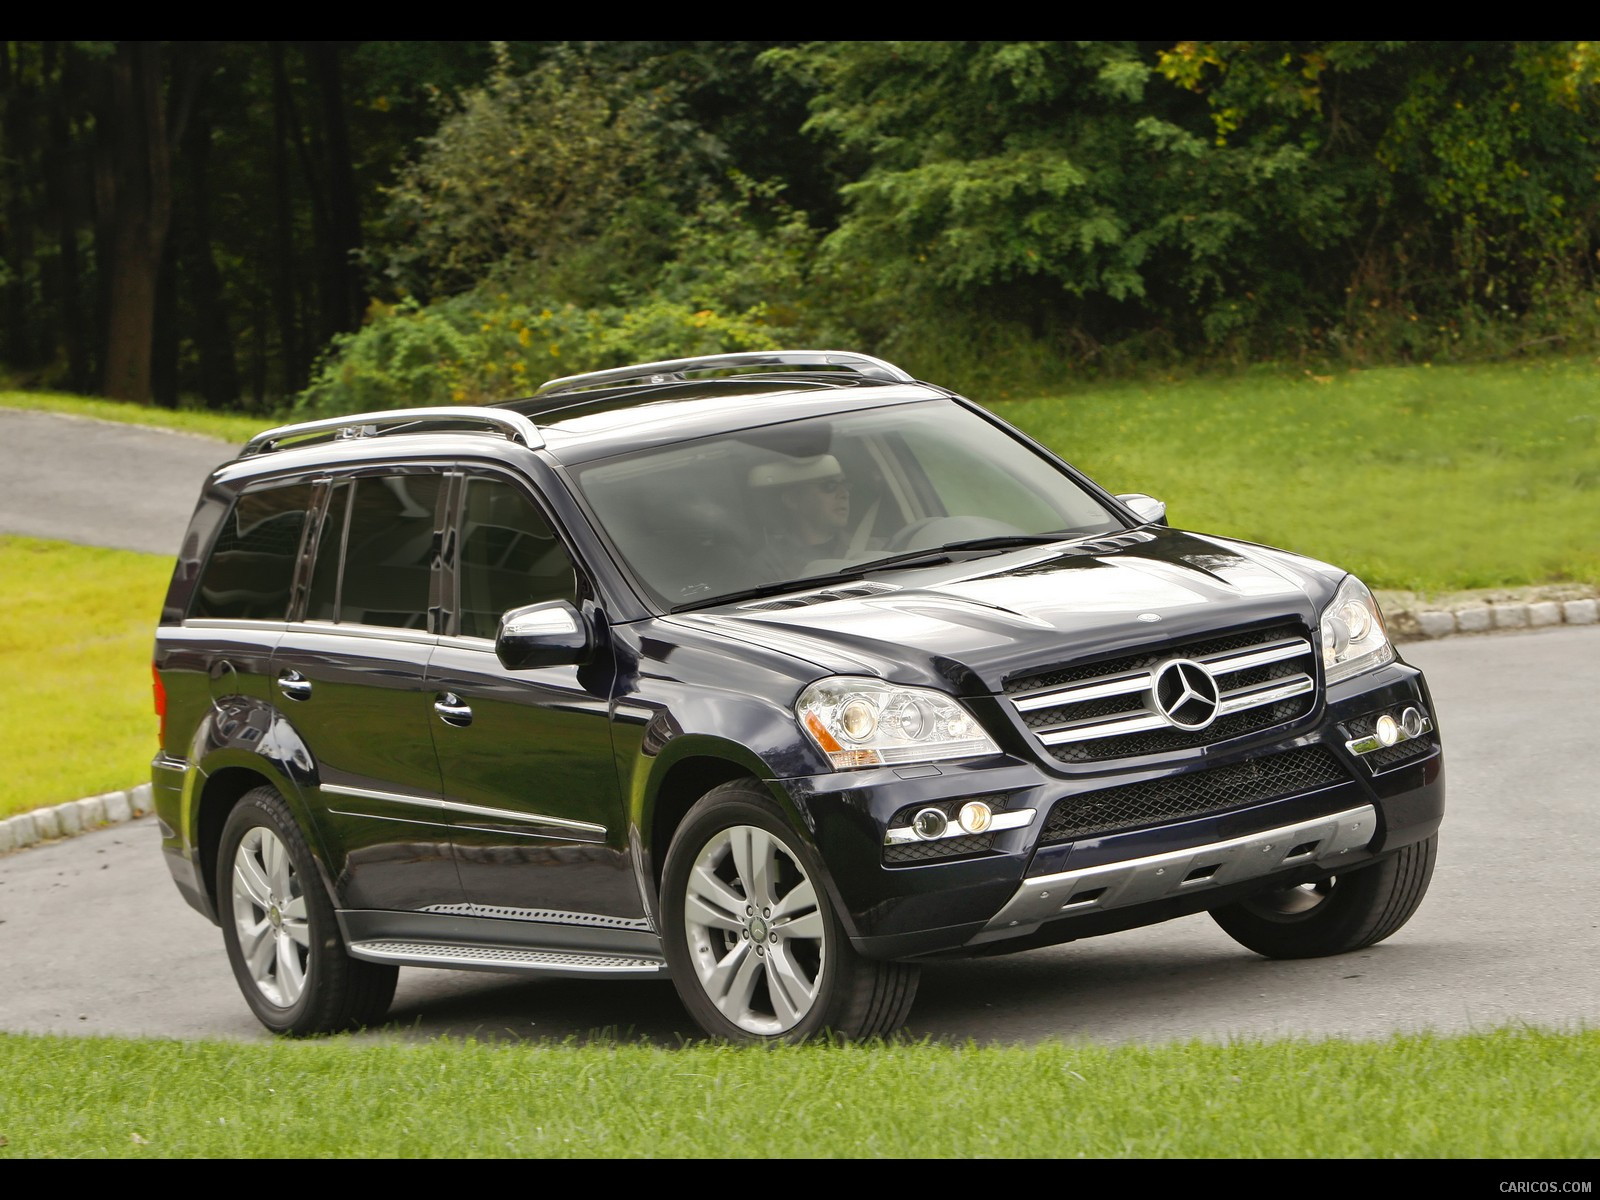 2010 Mercedes-Benz GL450 - Front, #95 of 112